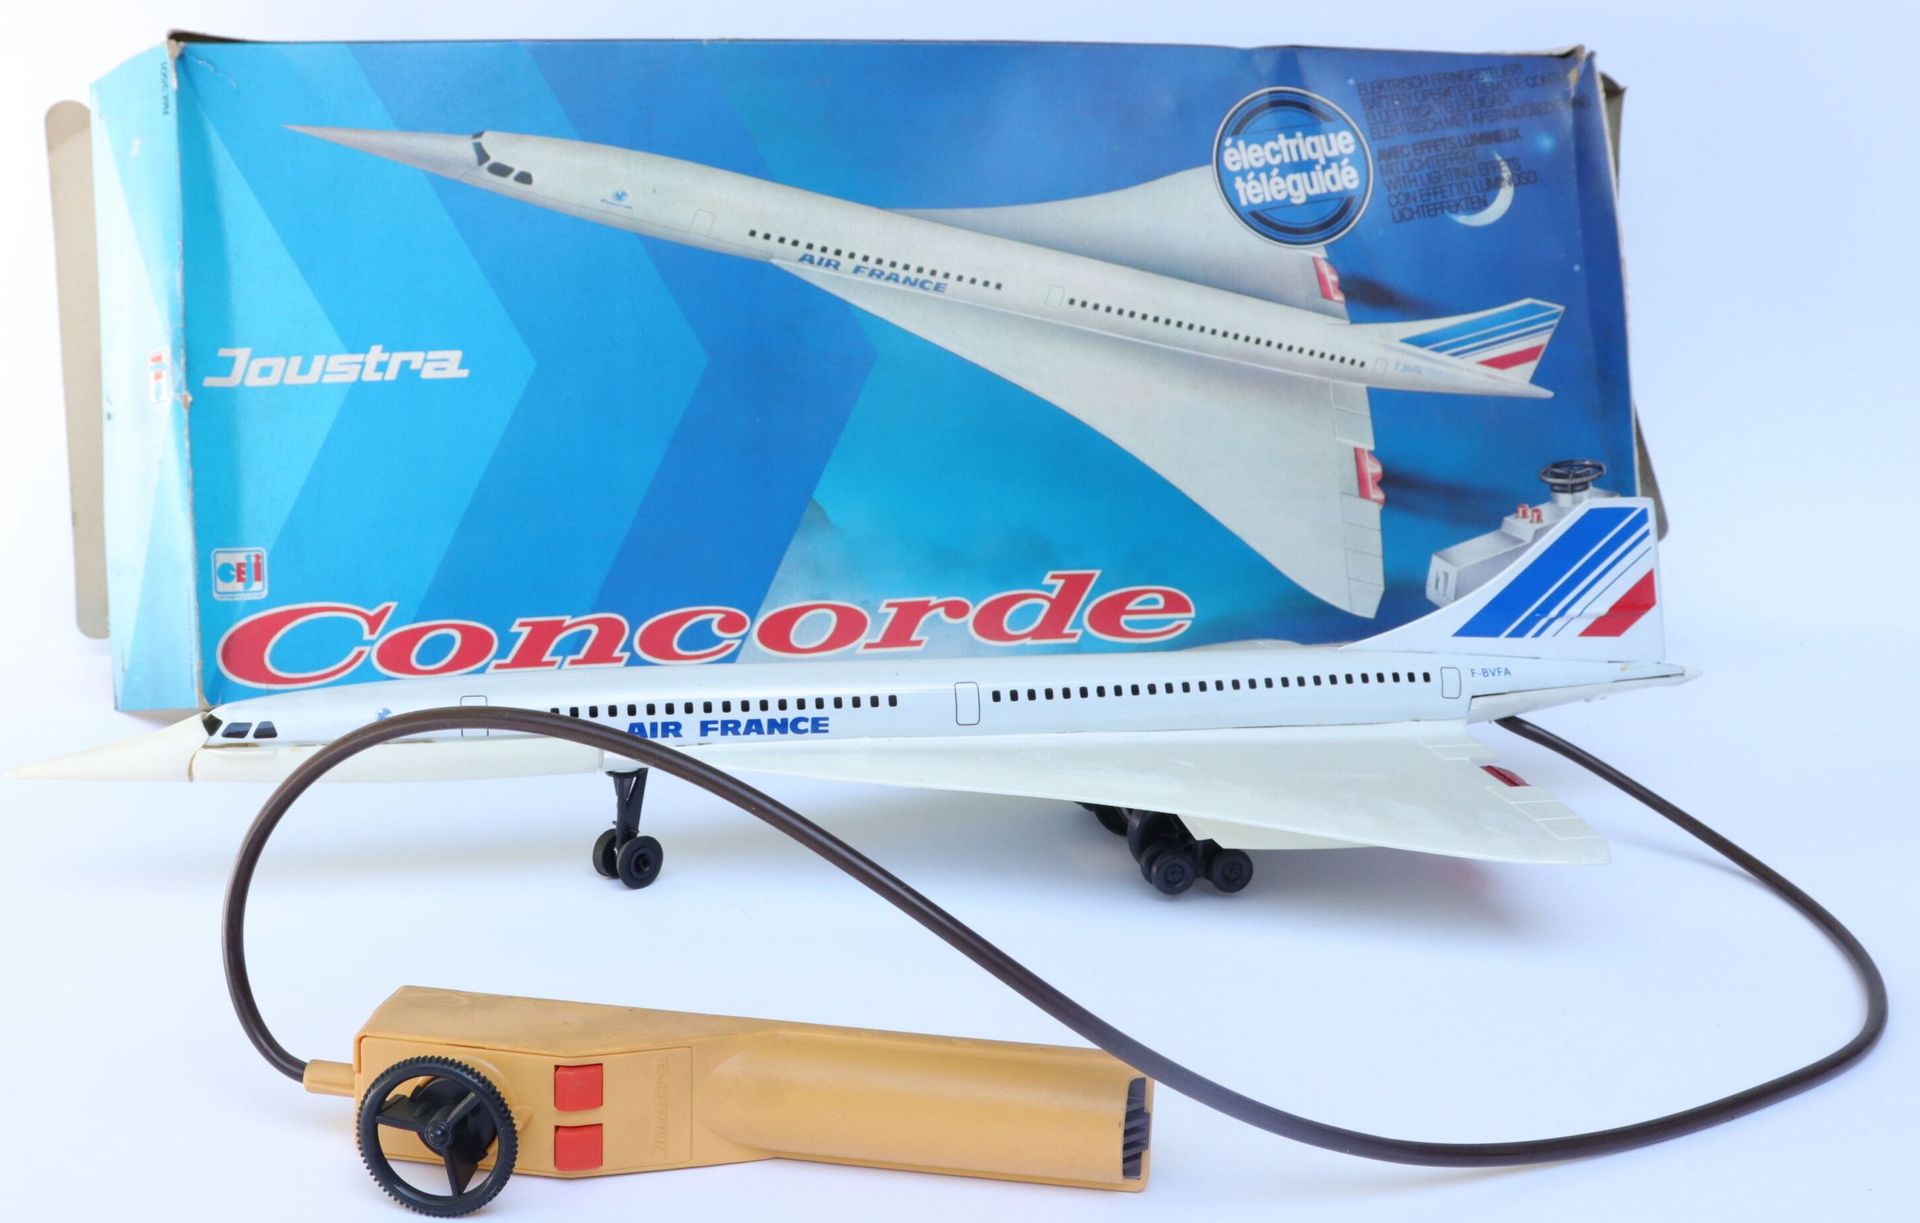 Null CONCORDE AIR FRANCE.

Toy plane JOUSTRA in lithographed sheet metal and pla&hellip;